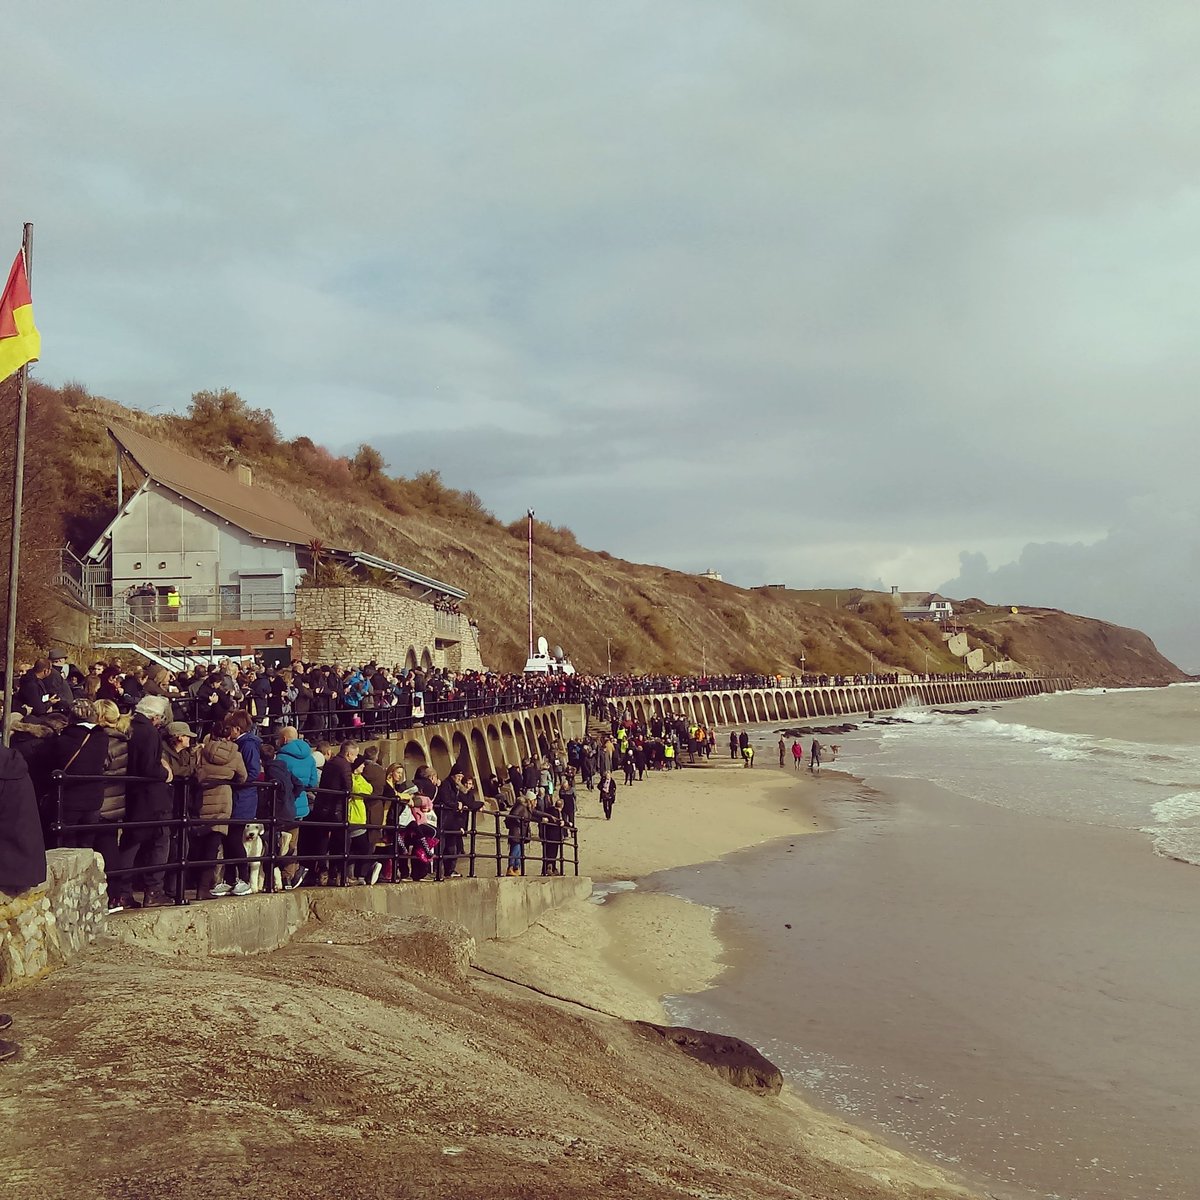 Thank you #folkestone #pagesofthesea #1418now @1418now #Remembrance2018 #dannyboyle #sunnysands #remembrance #lestweforget